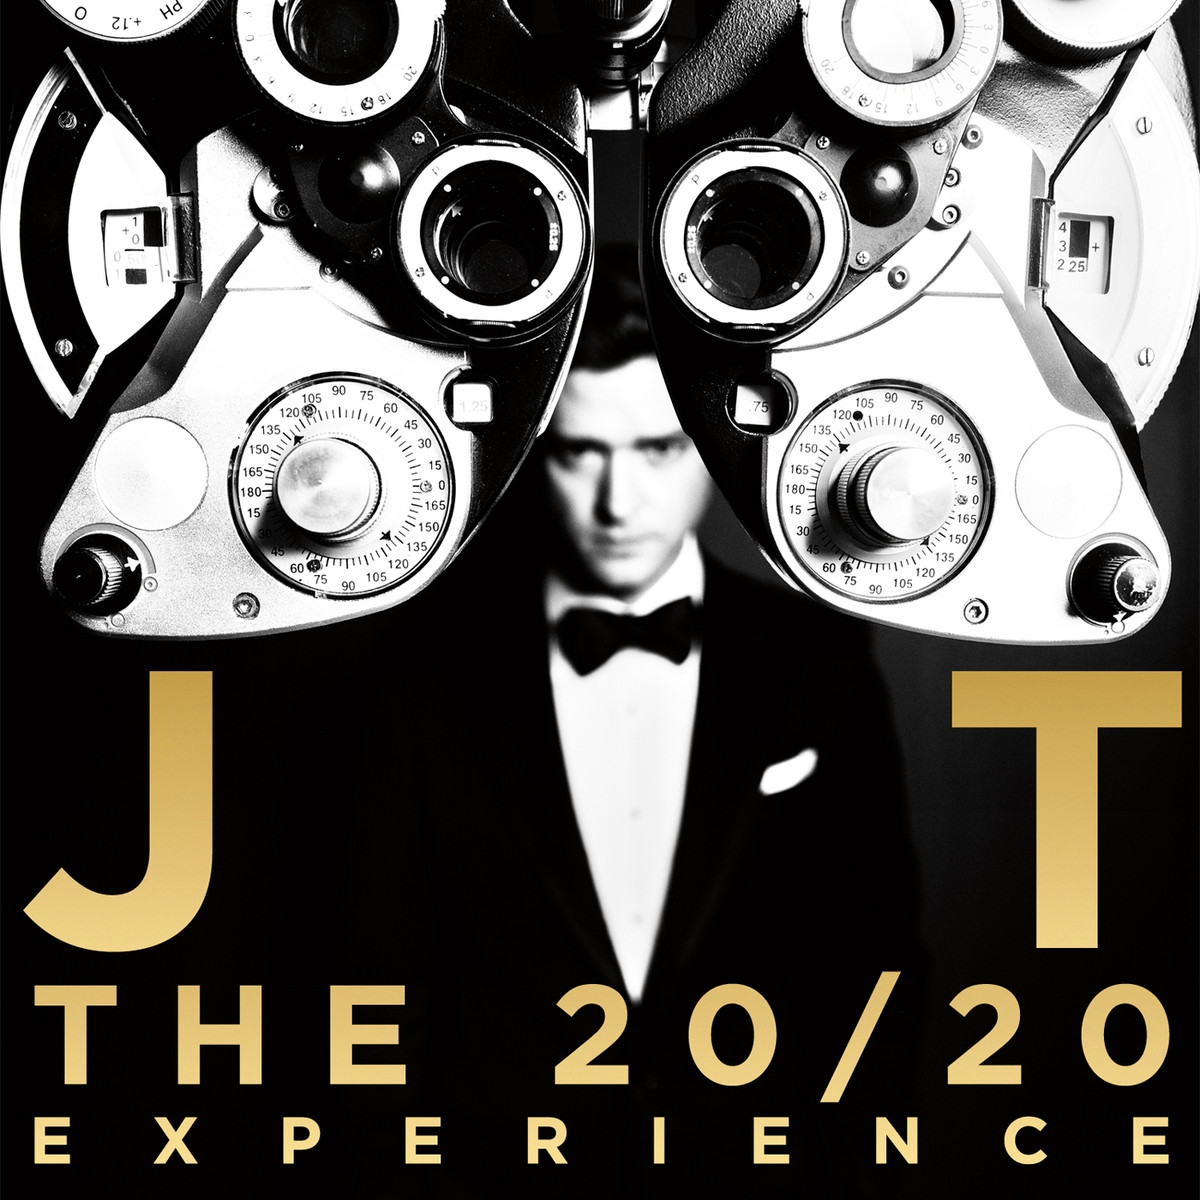 http://4.bp.blogspot.com/-ehTKSDiwe8c/UUprvC9yw2I/AAAAAAAAAgs/5Dos0EowSE4/s1600/Justin-Timberlake-The-20_20-Experience-Deluxe-Version-2013-1200x1200.png